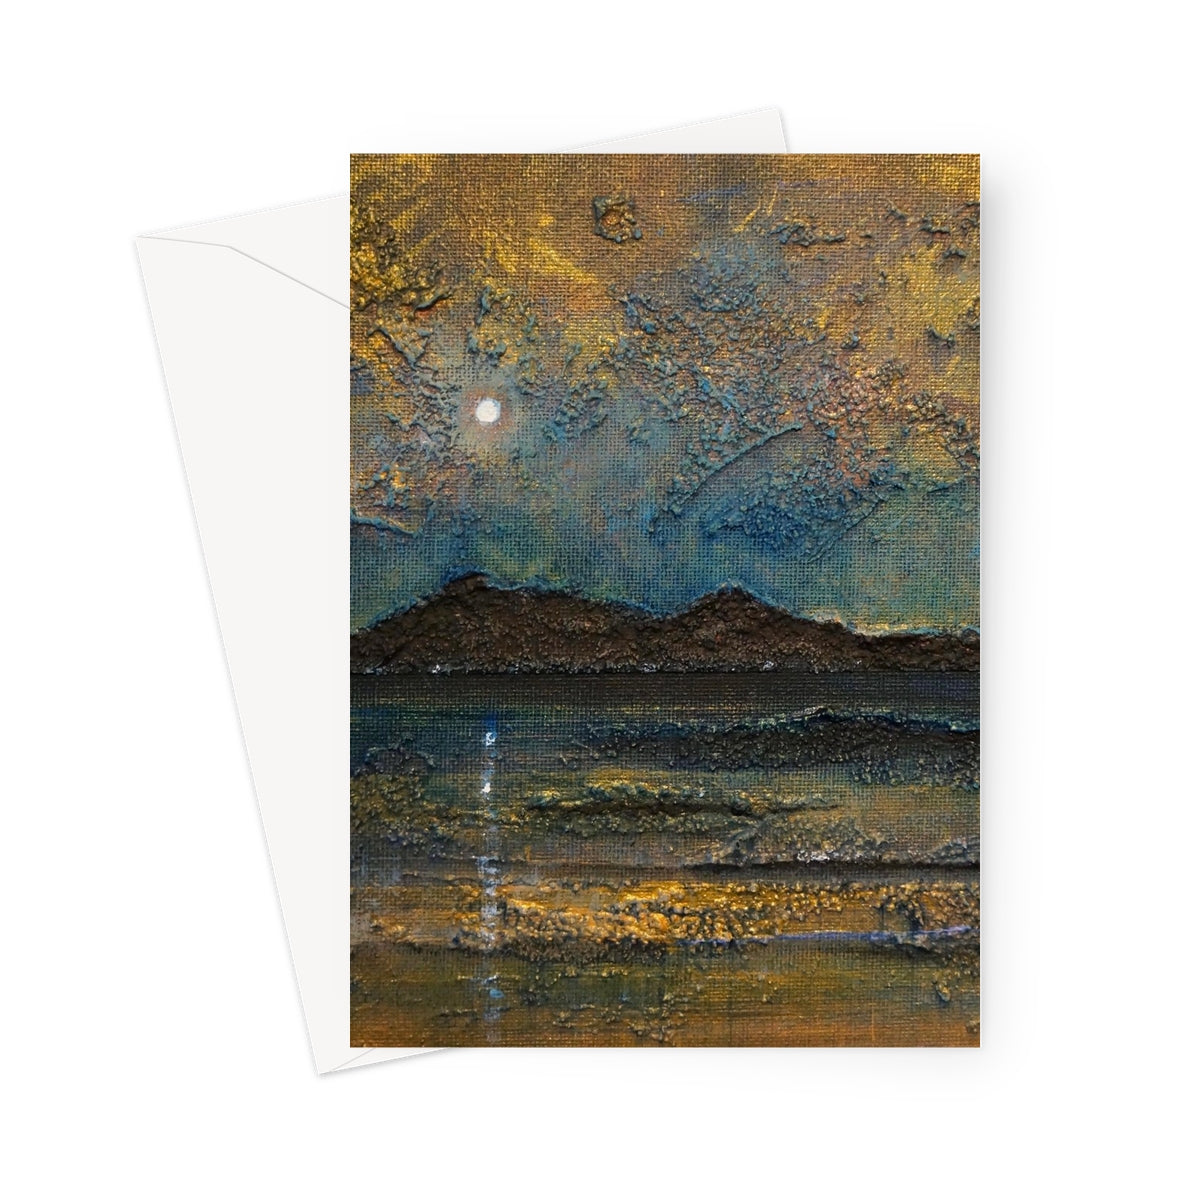 Arran Moonlight Art Gifts Greeting Card-Greetings Cards-Arran Art Gallery-5"x7"-10 Cards-Paintings, Prints, Homeware, Art Gifts From Scotland By Scottish Artist Kevin Hunter